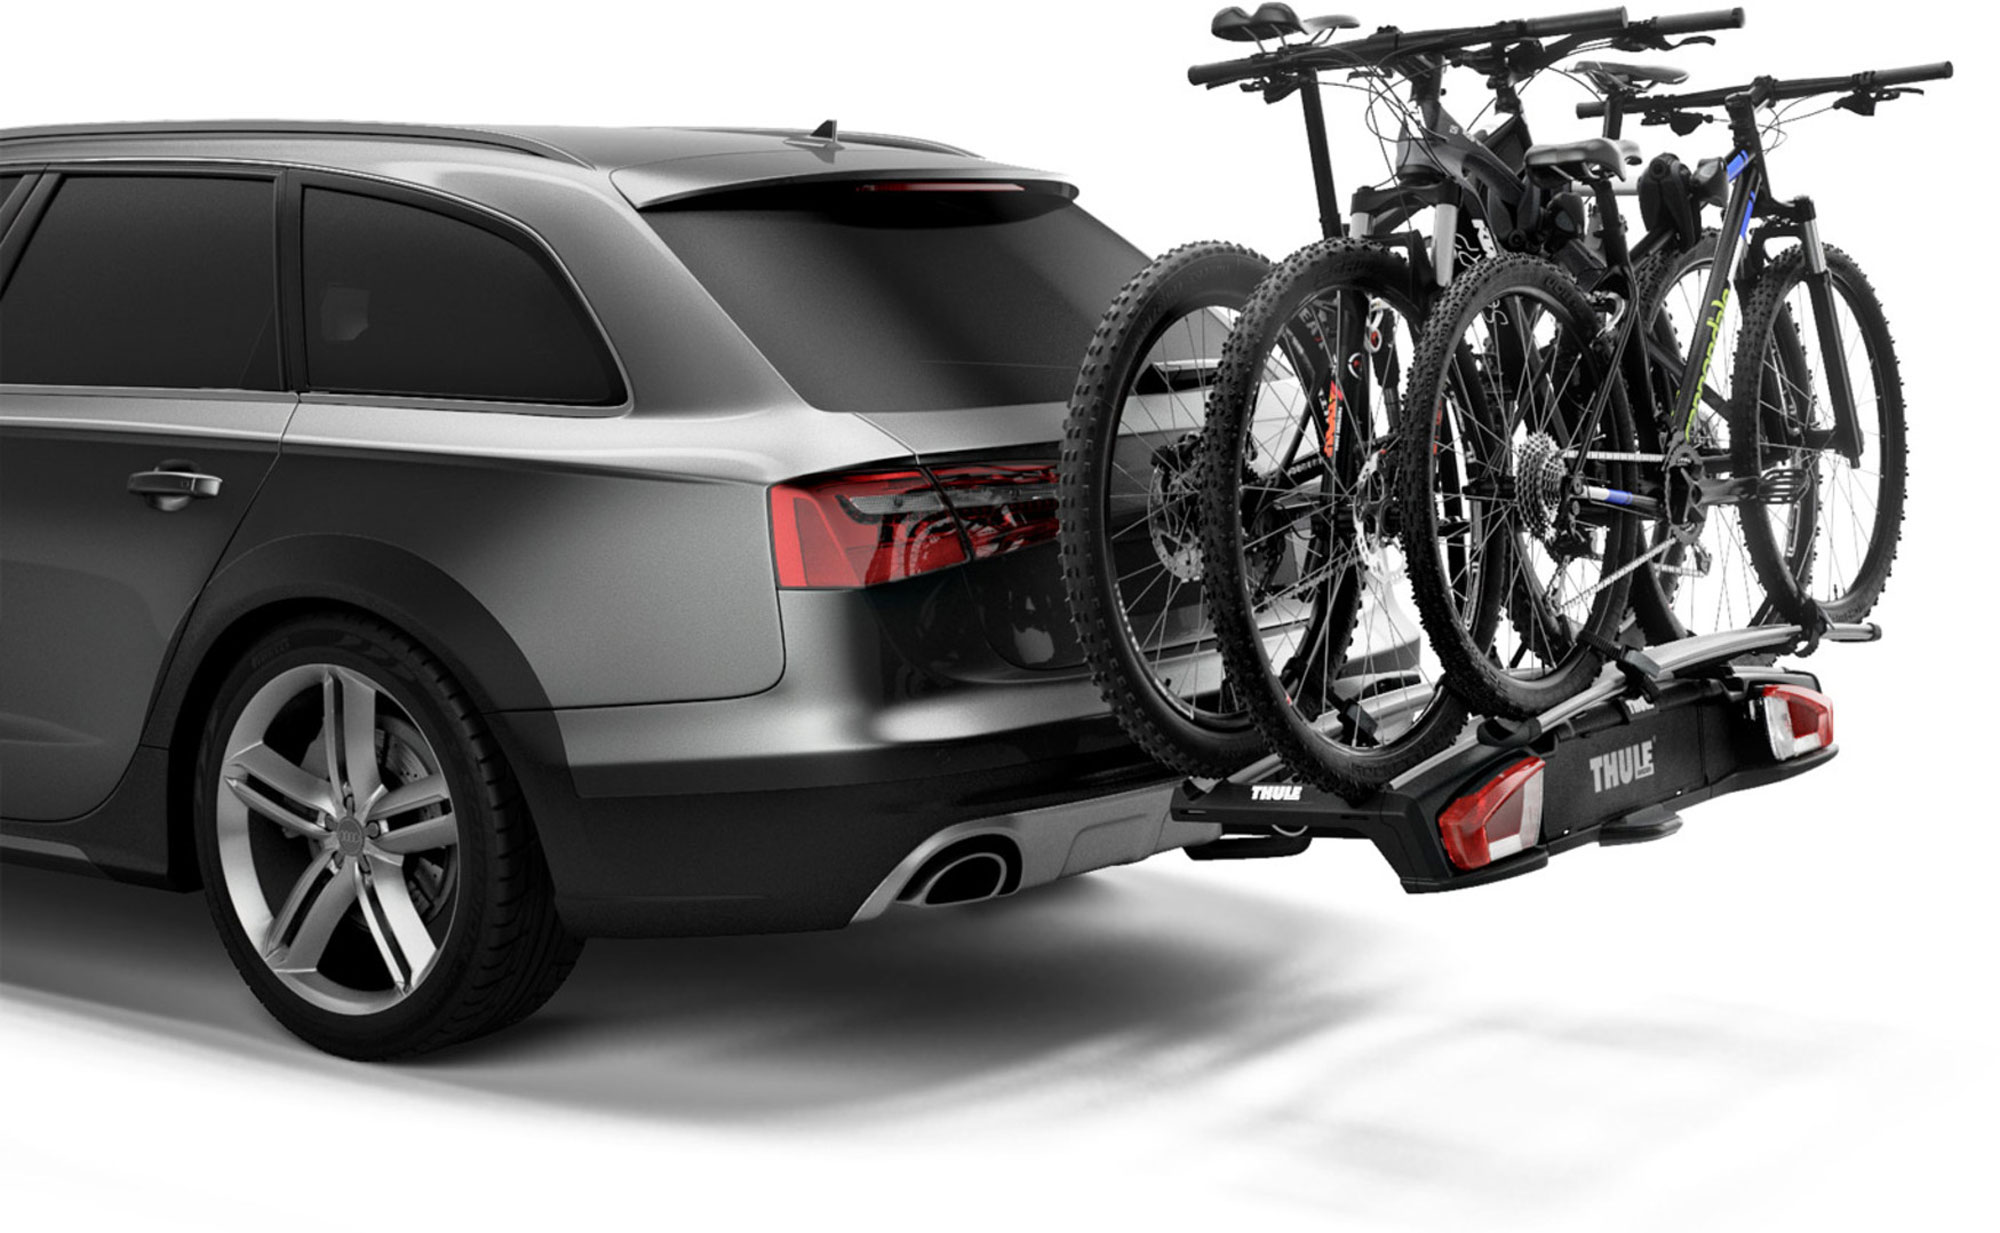 Universal bicycle carrier